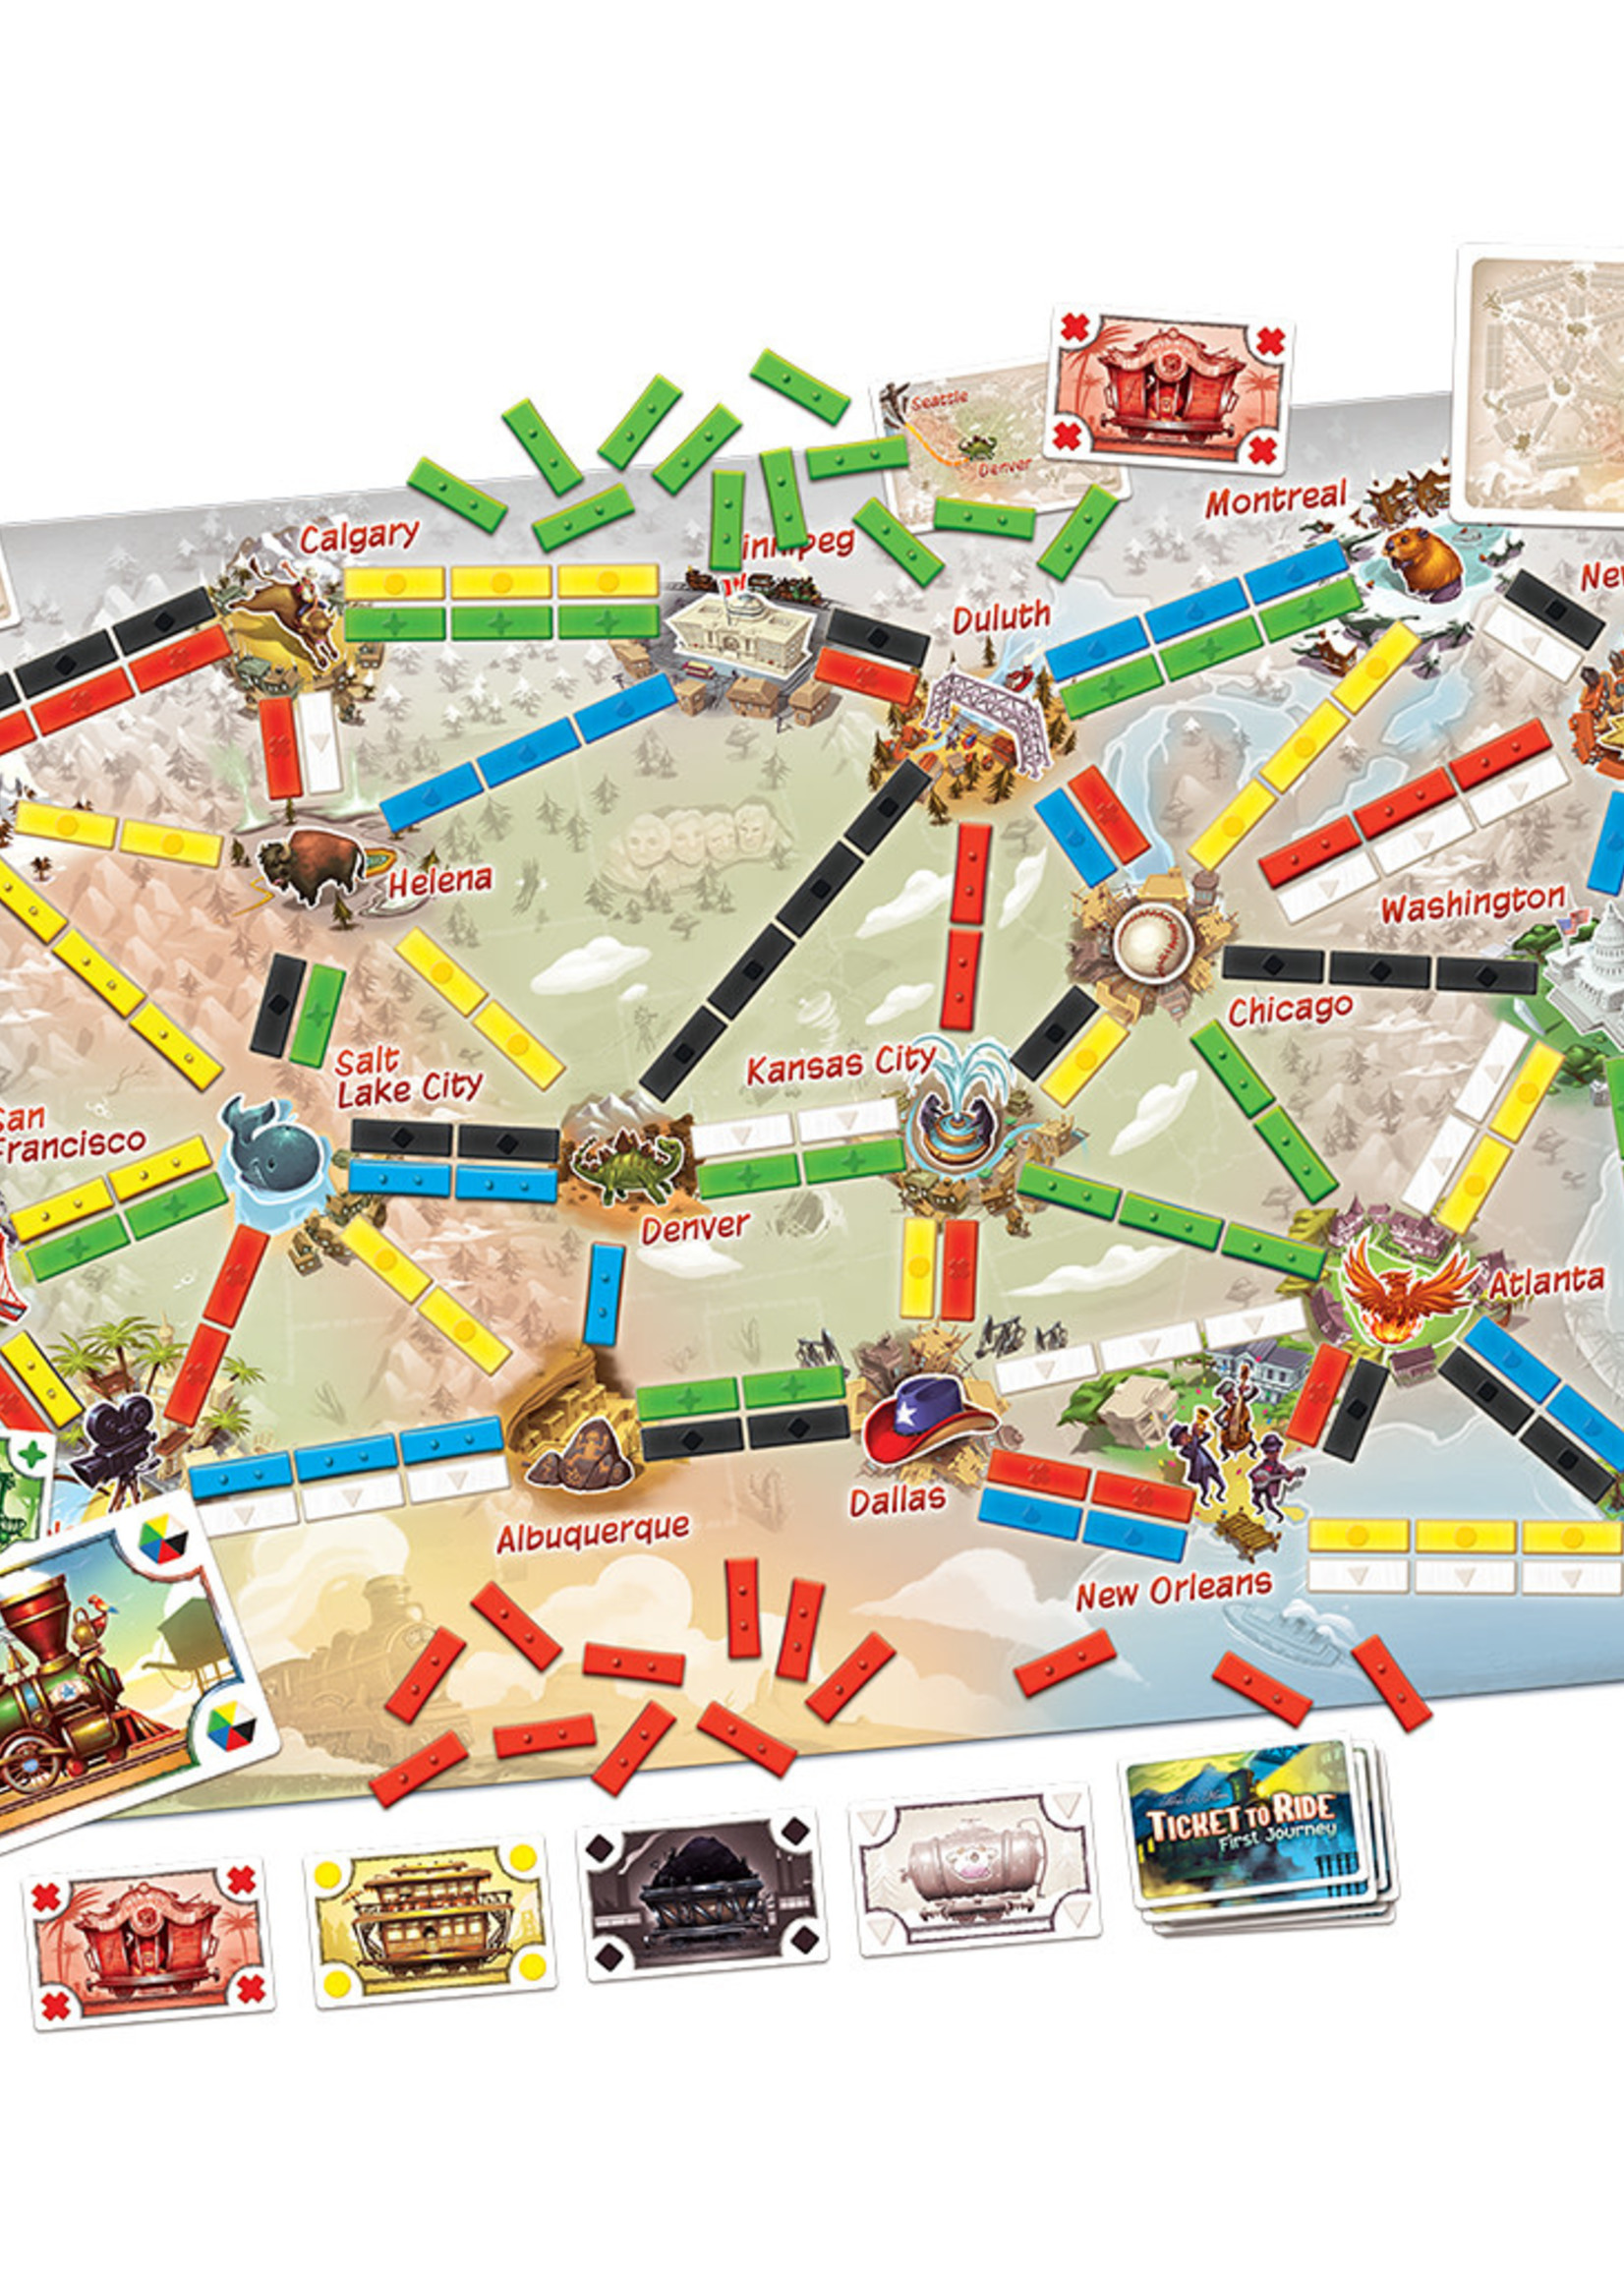 Asmodee ticket to ride first journey